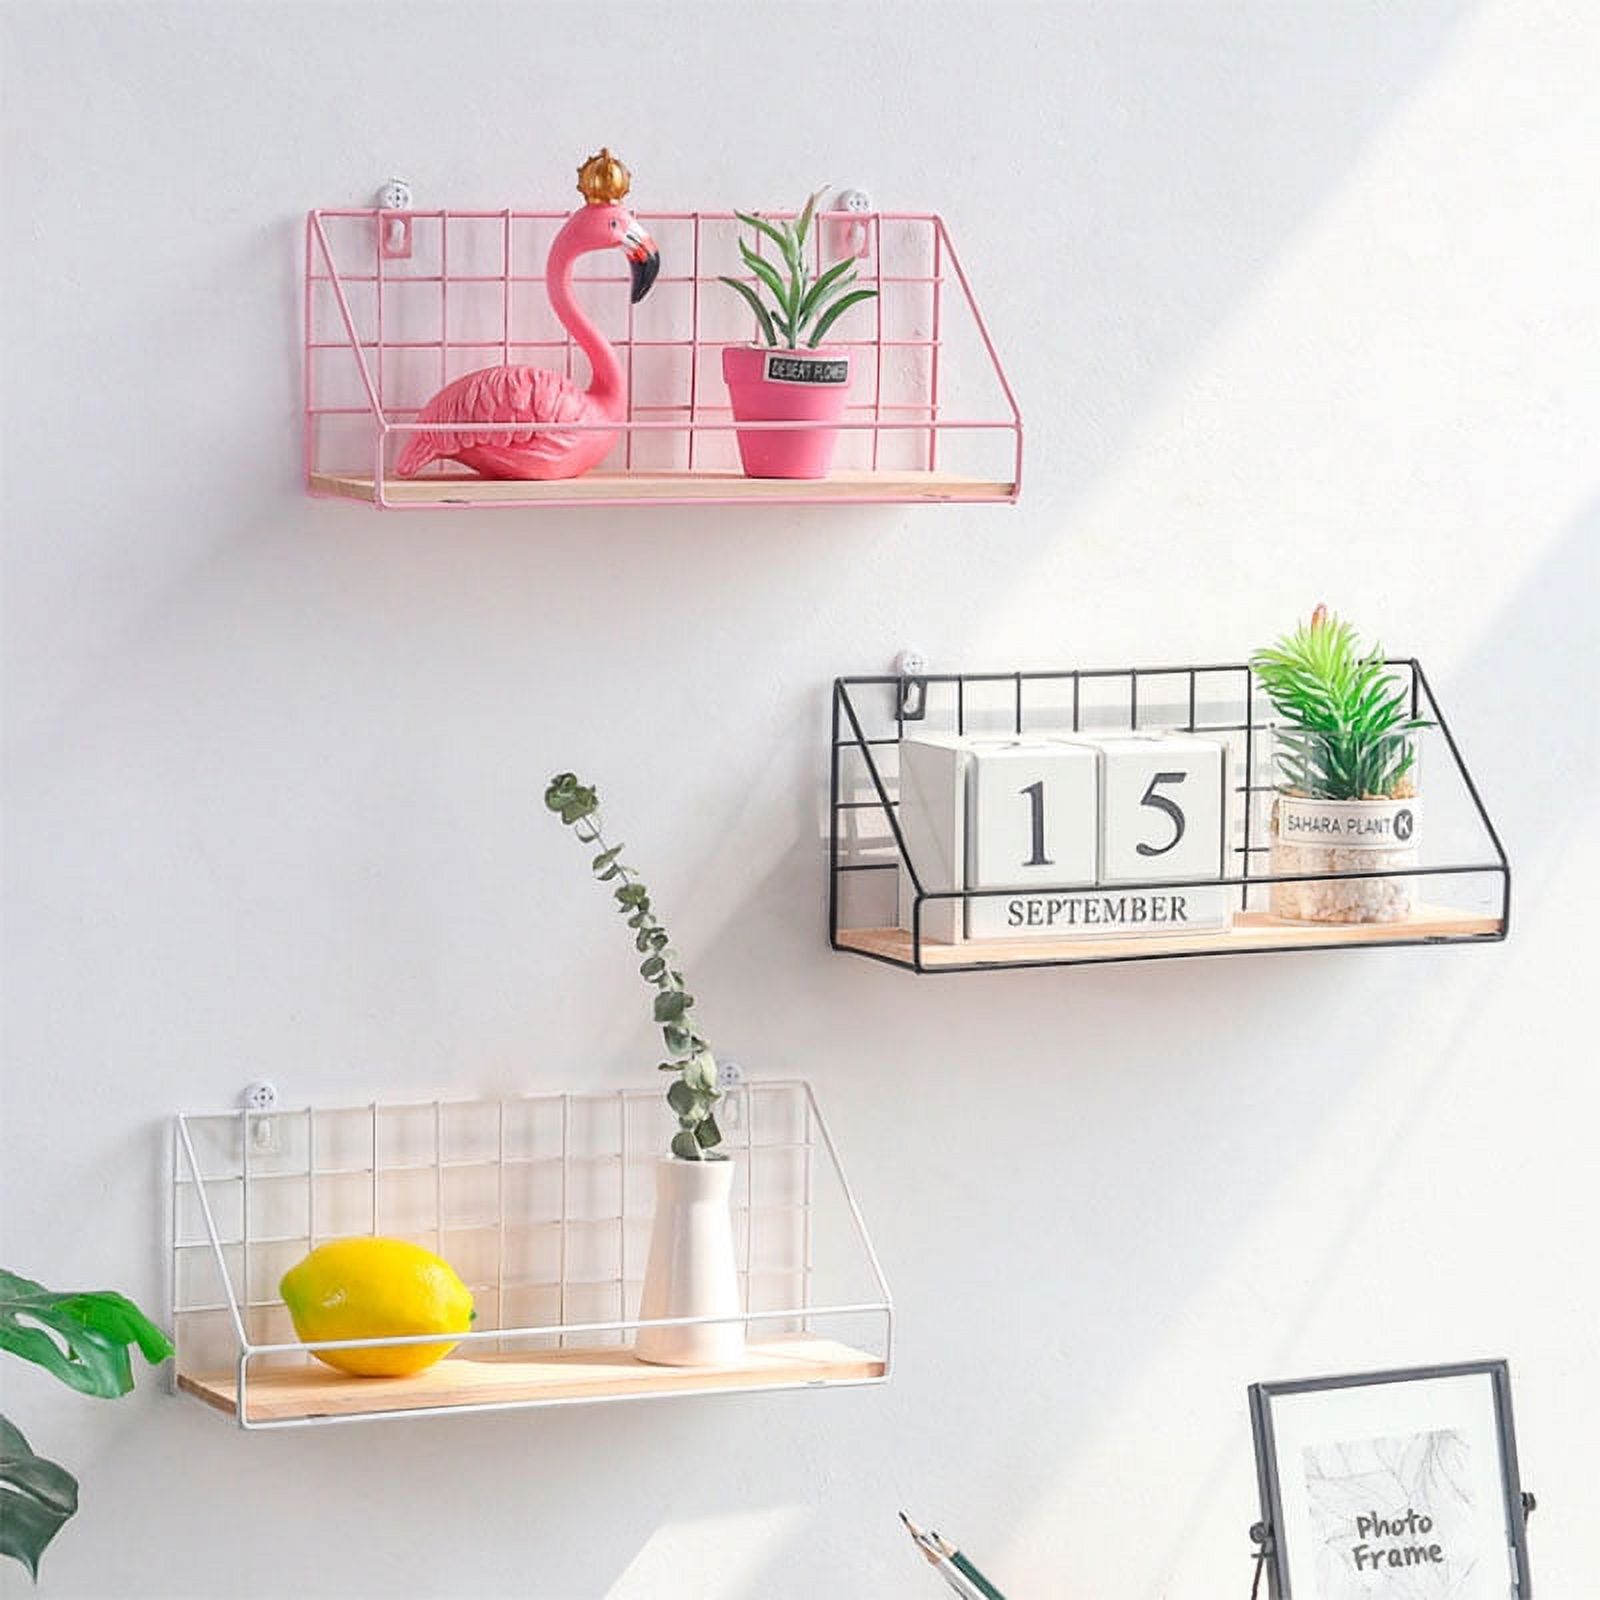 Industrial Style Iron Art Storage Holders,Wall Mounted Home Storage Shelf Hanging Storage Box for Flower Pots Book Storage Cosmetic Racks - image 3 of 7